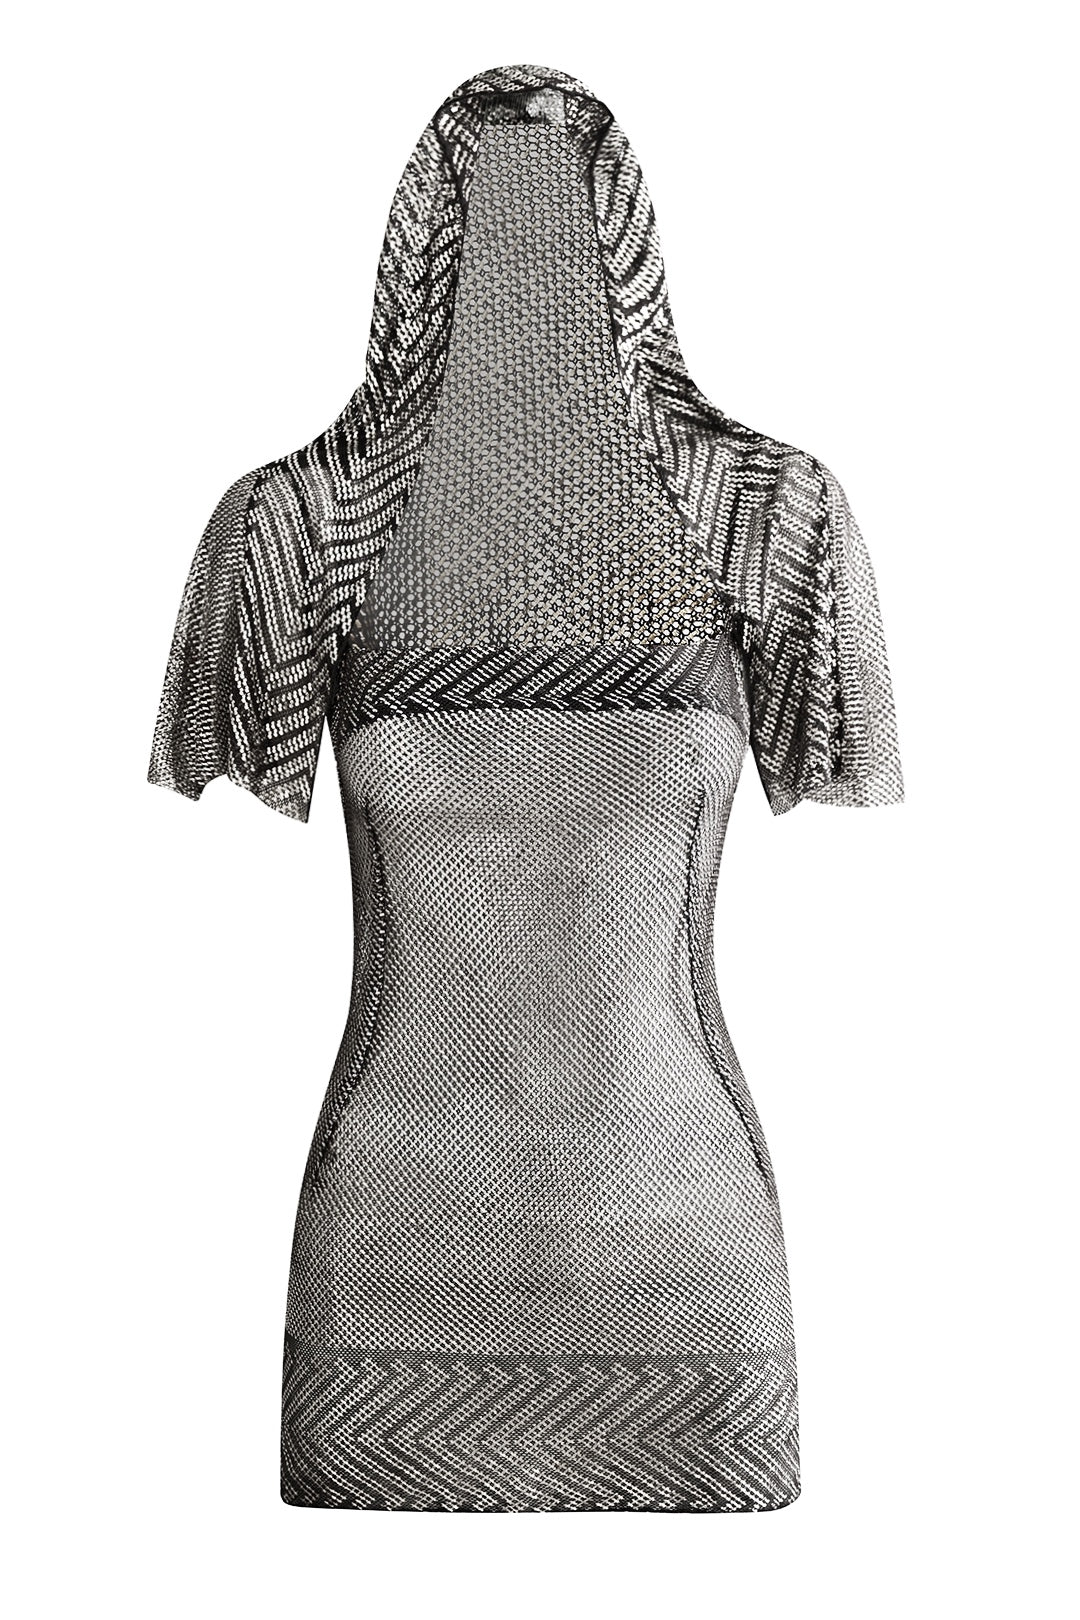 1920's Egyptian Black and Silver Hooded Cape